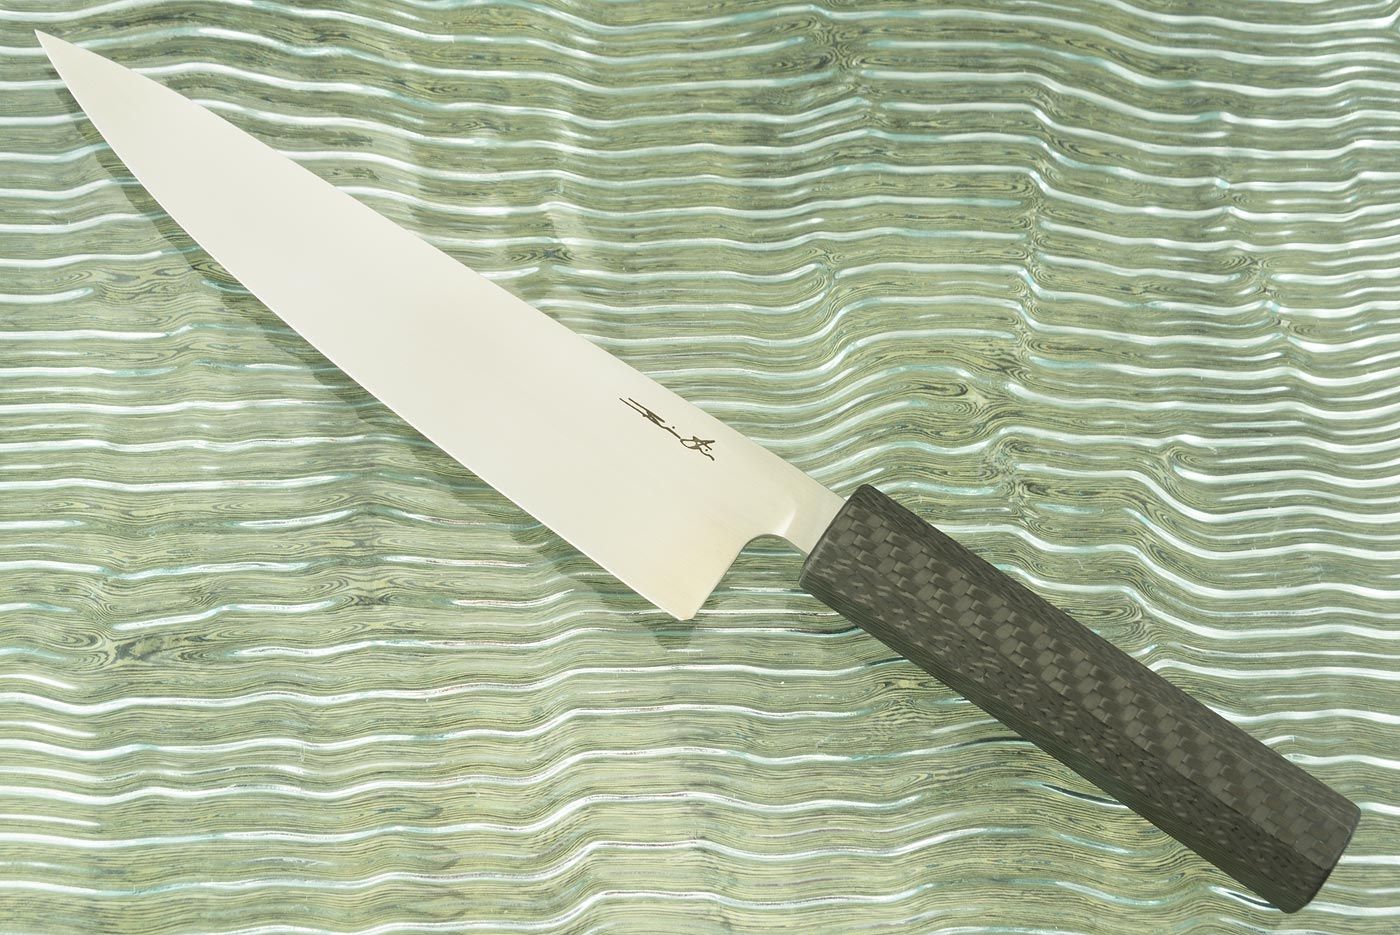 Chef's Knife (8 in.) with Carbon Fiber